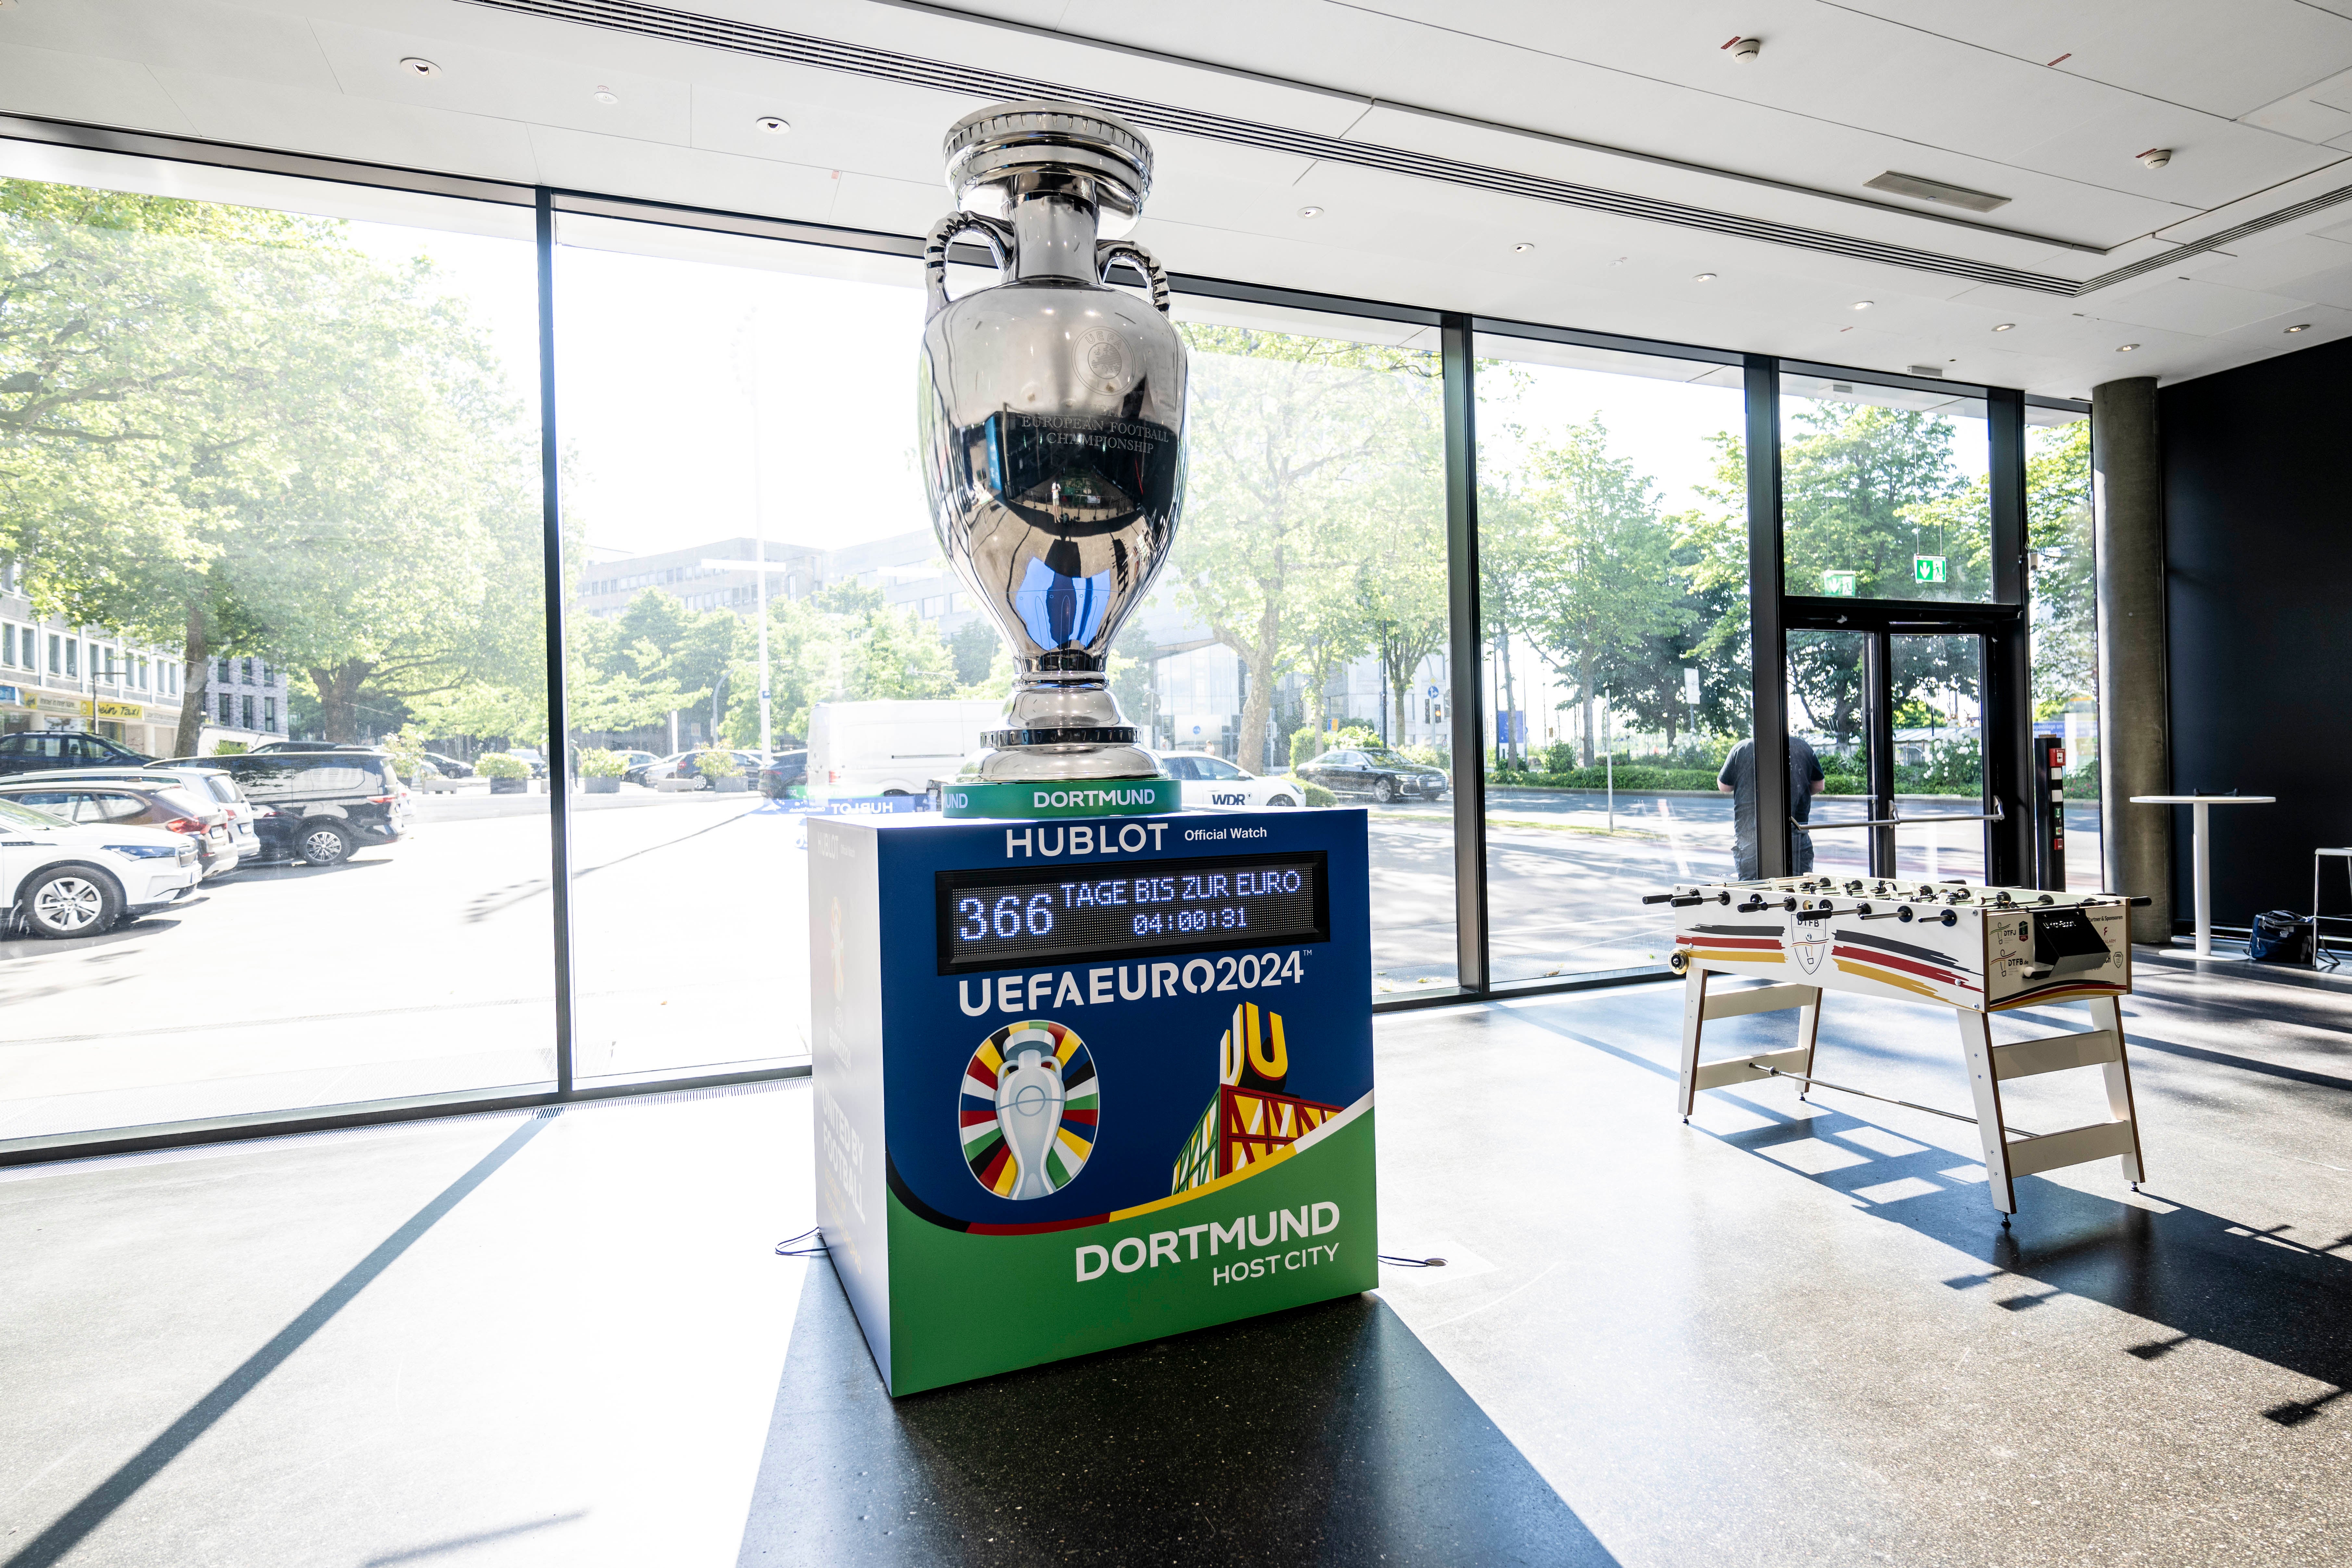 Euro 2024 will take place in Germany this summer